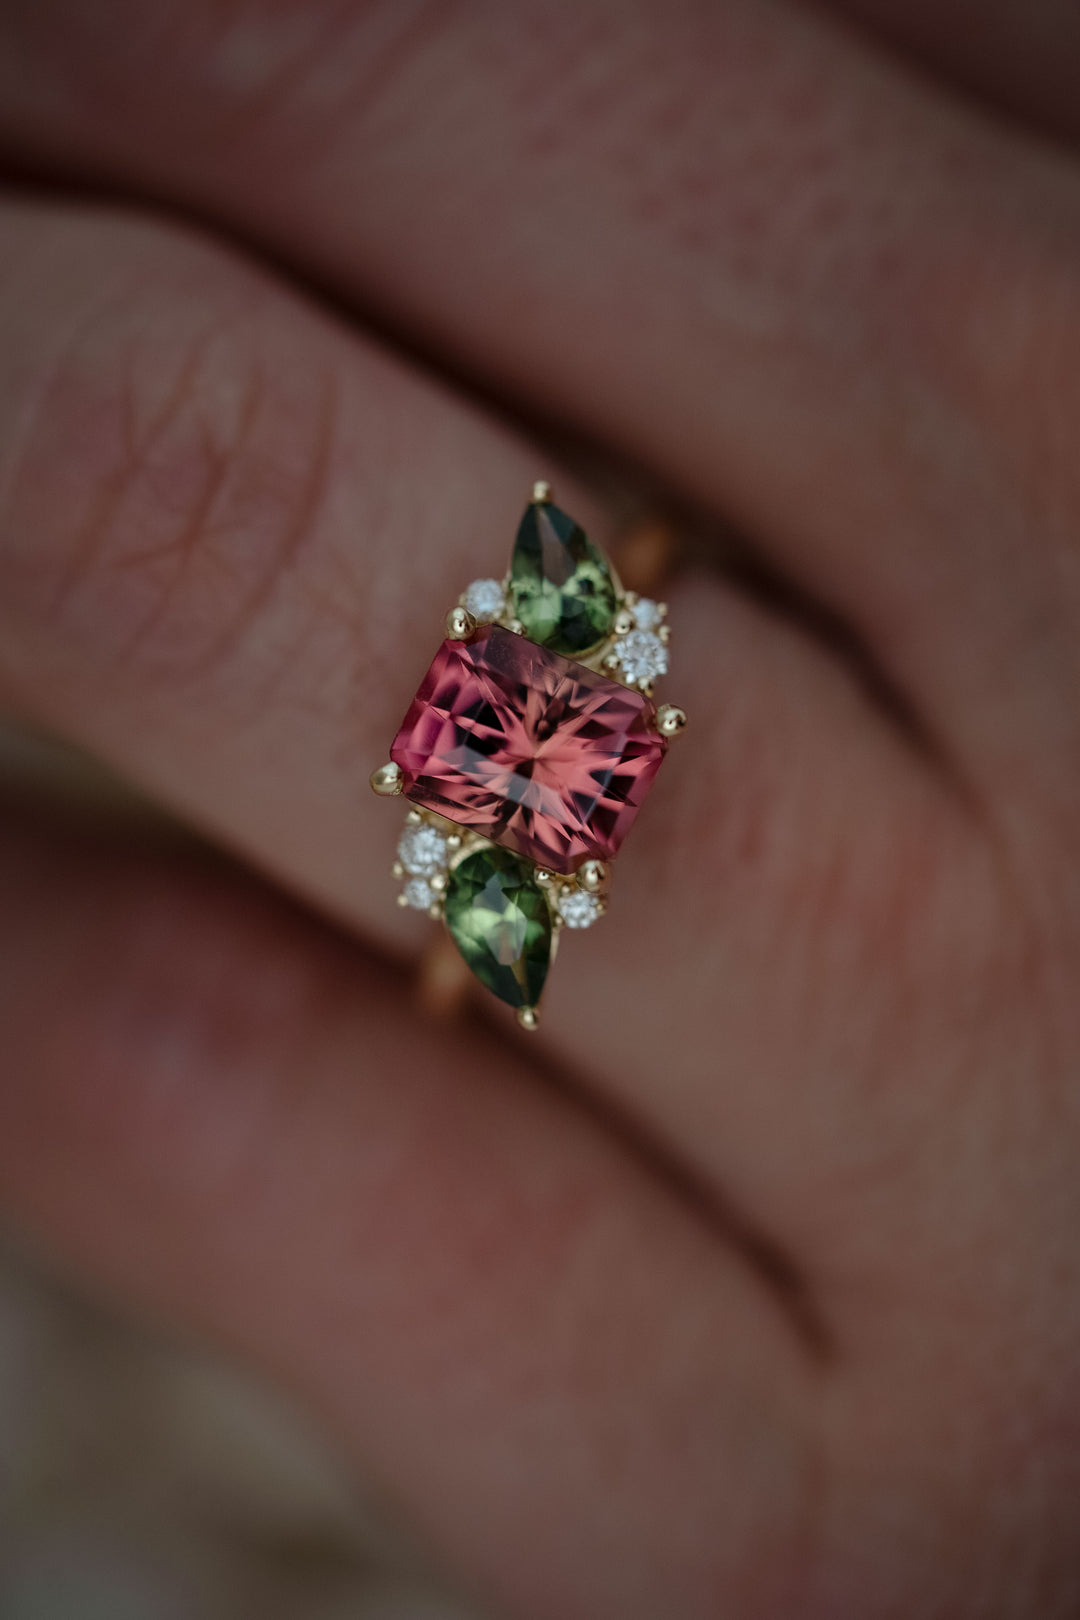 The Fleur 2.82 CT Radiant Pink Tourmaline + Green Sapphire Ring